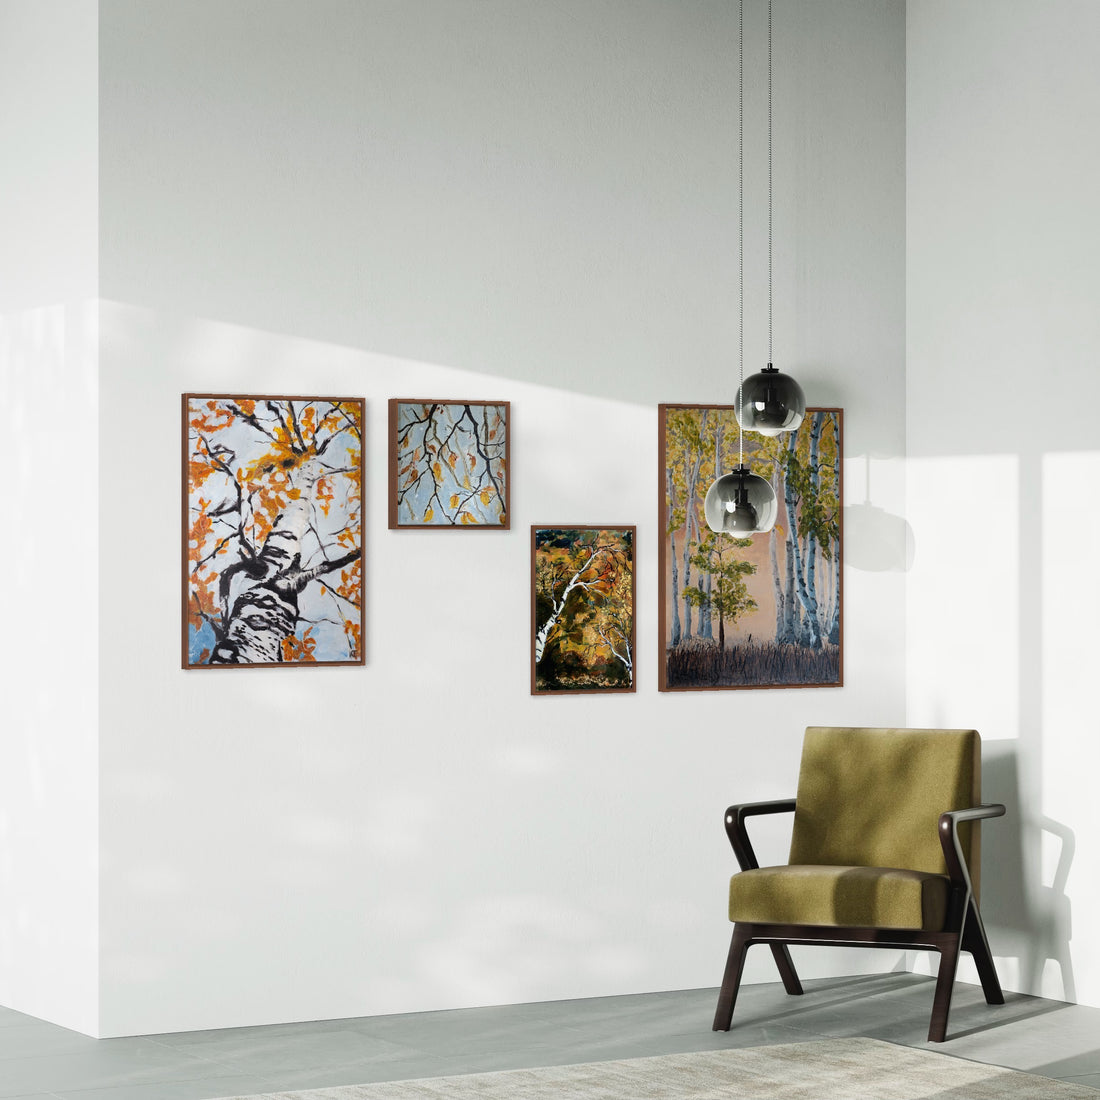 7 tips how to create a gallery wall